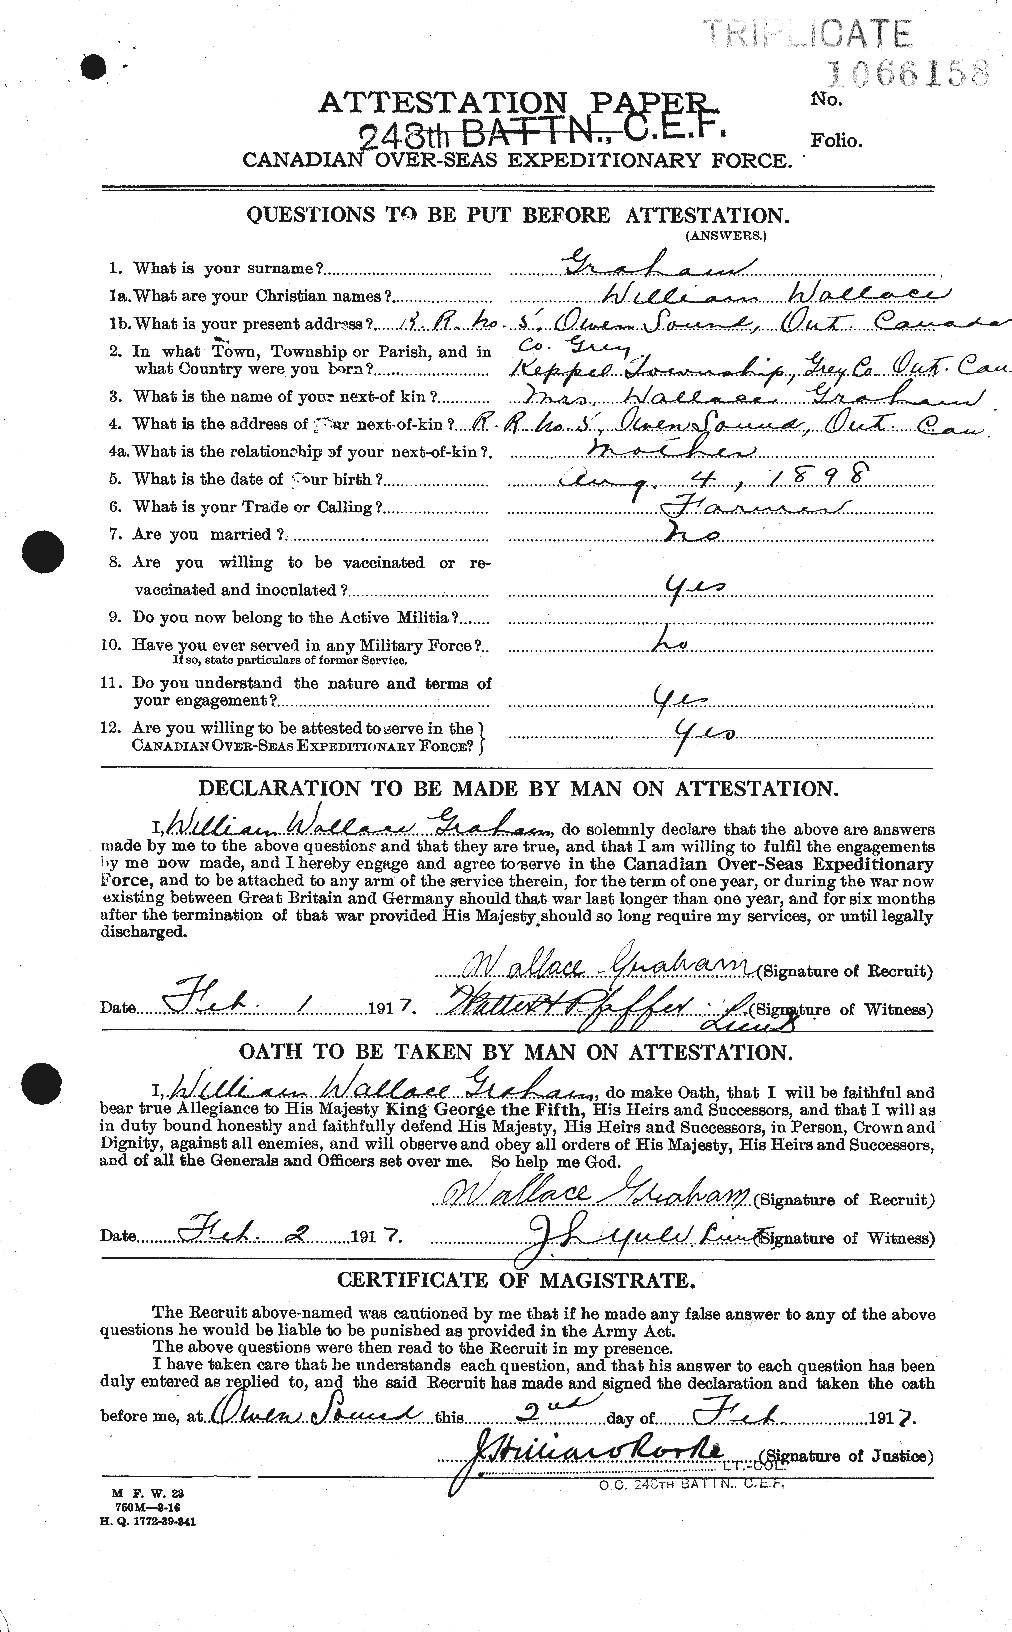 Personnel Records of the First World War - CEF 358044a